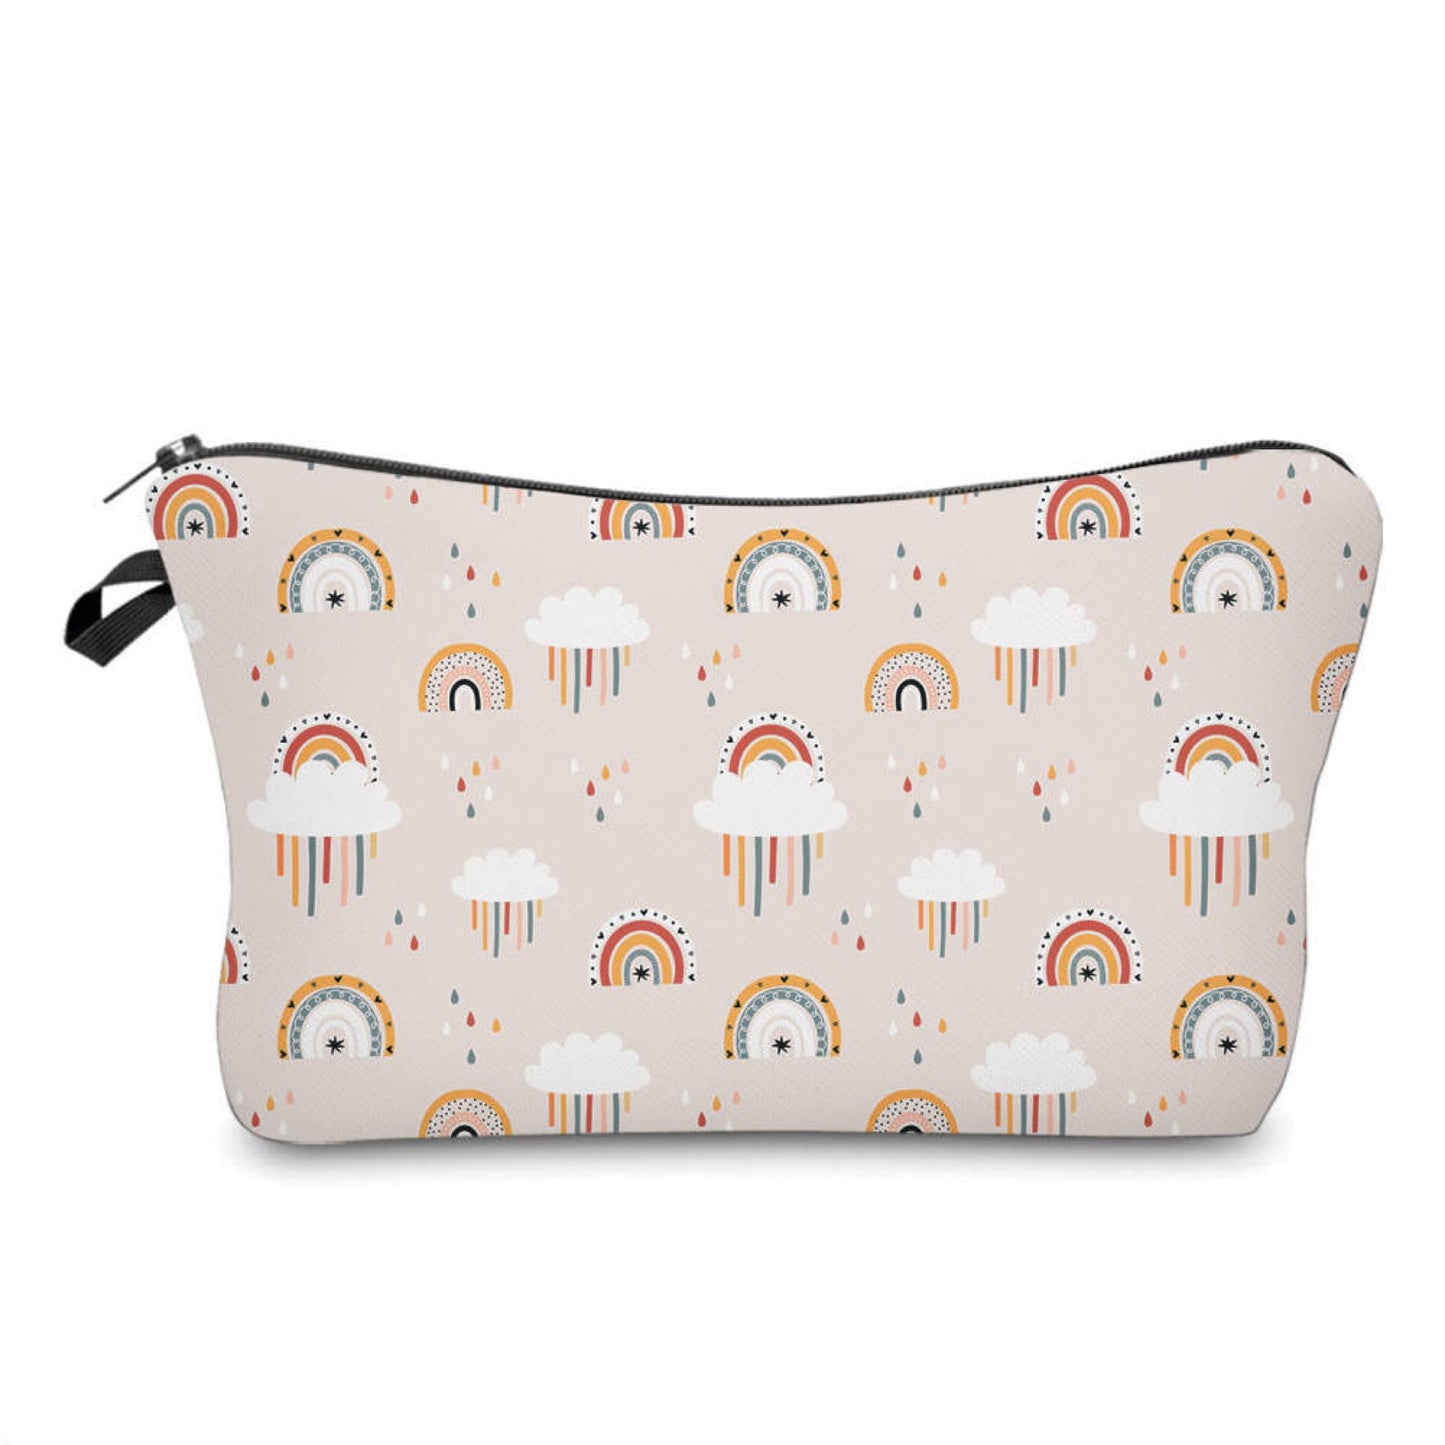 Rainbow Cloud - Water-Resistant Multi-Use Pouch